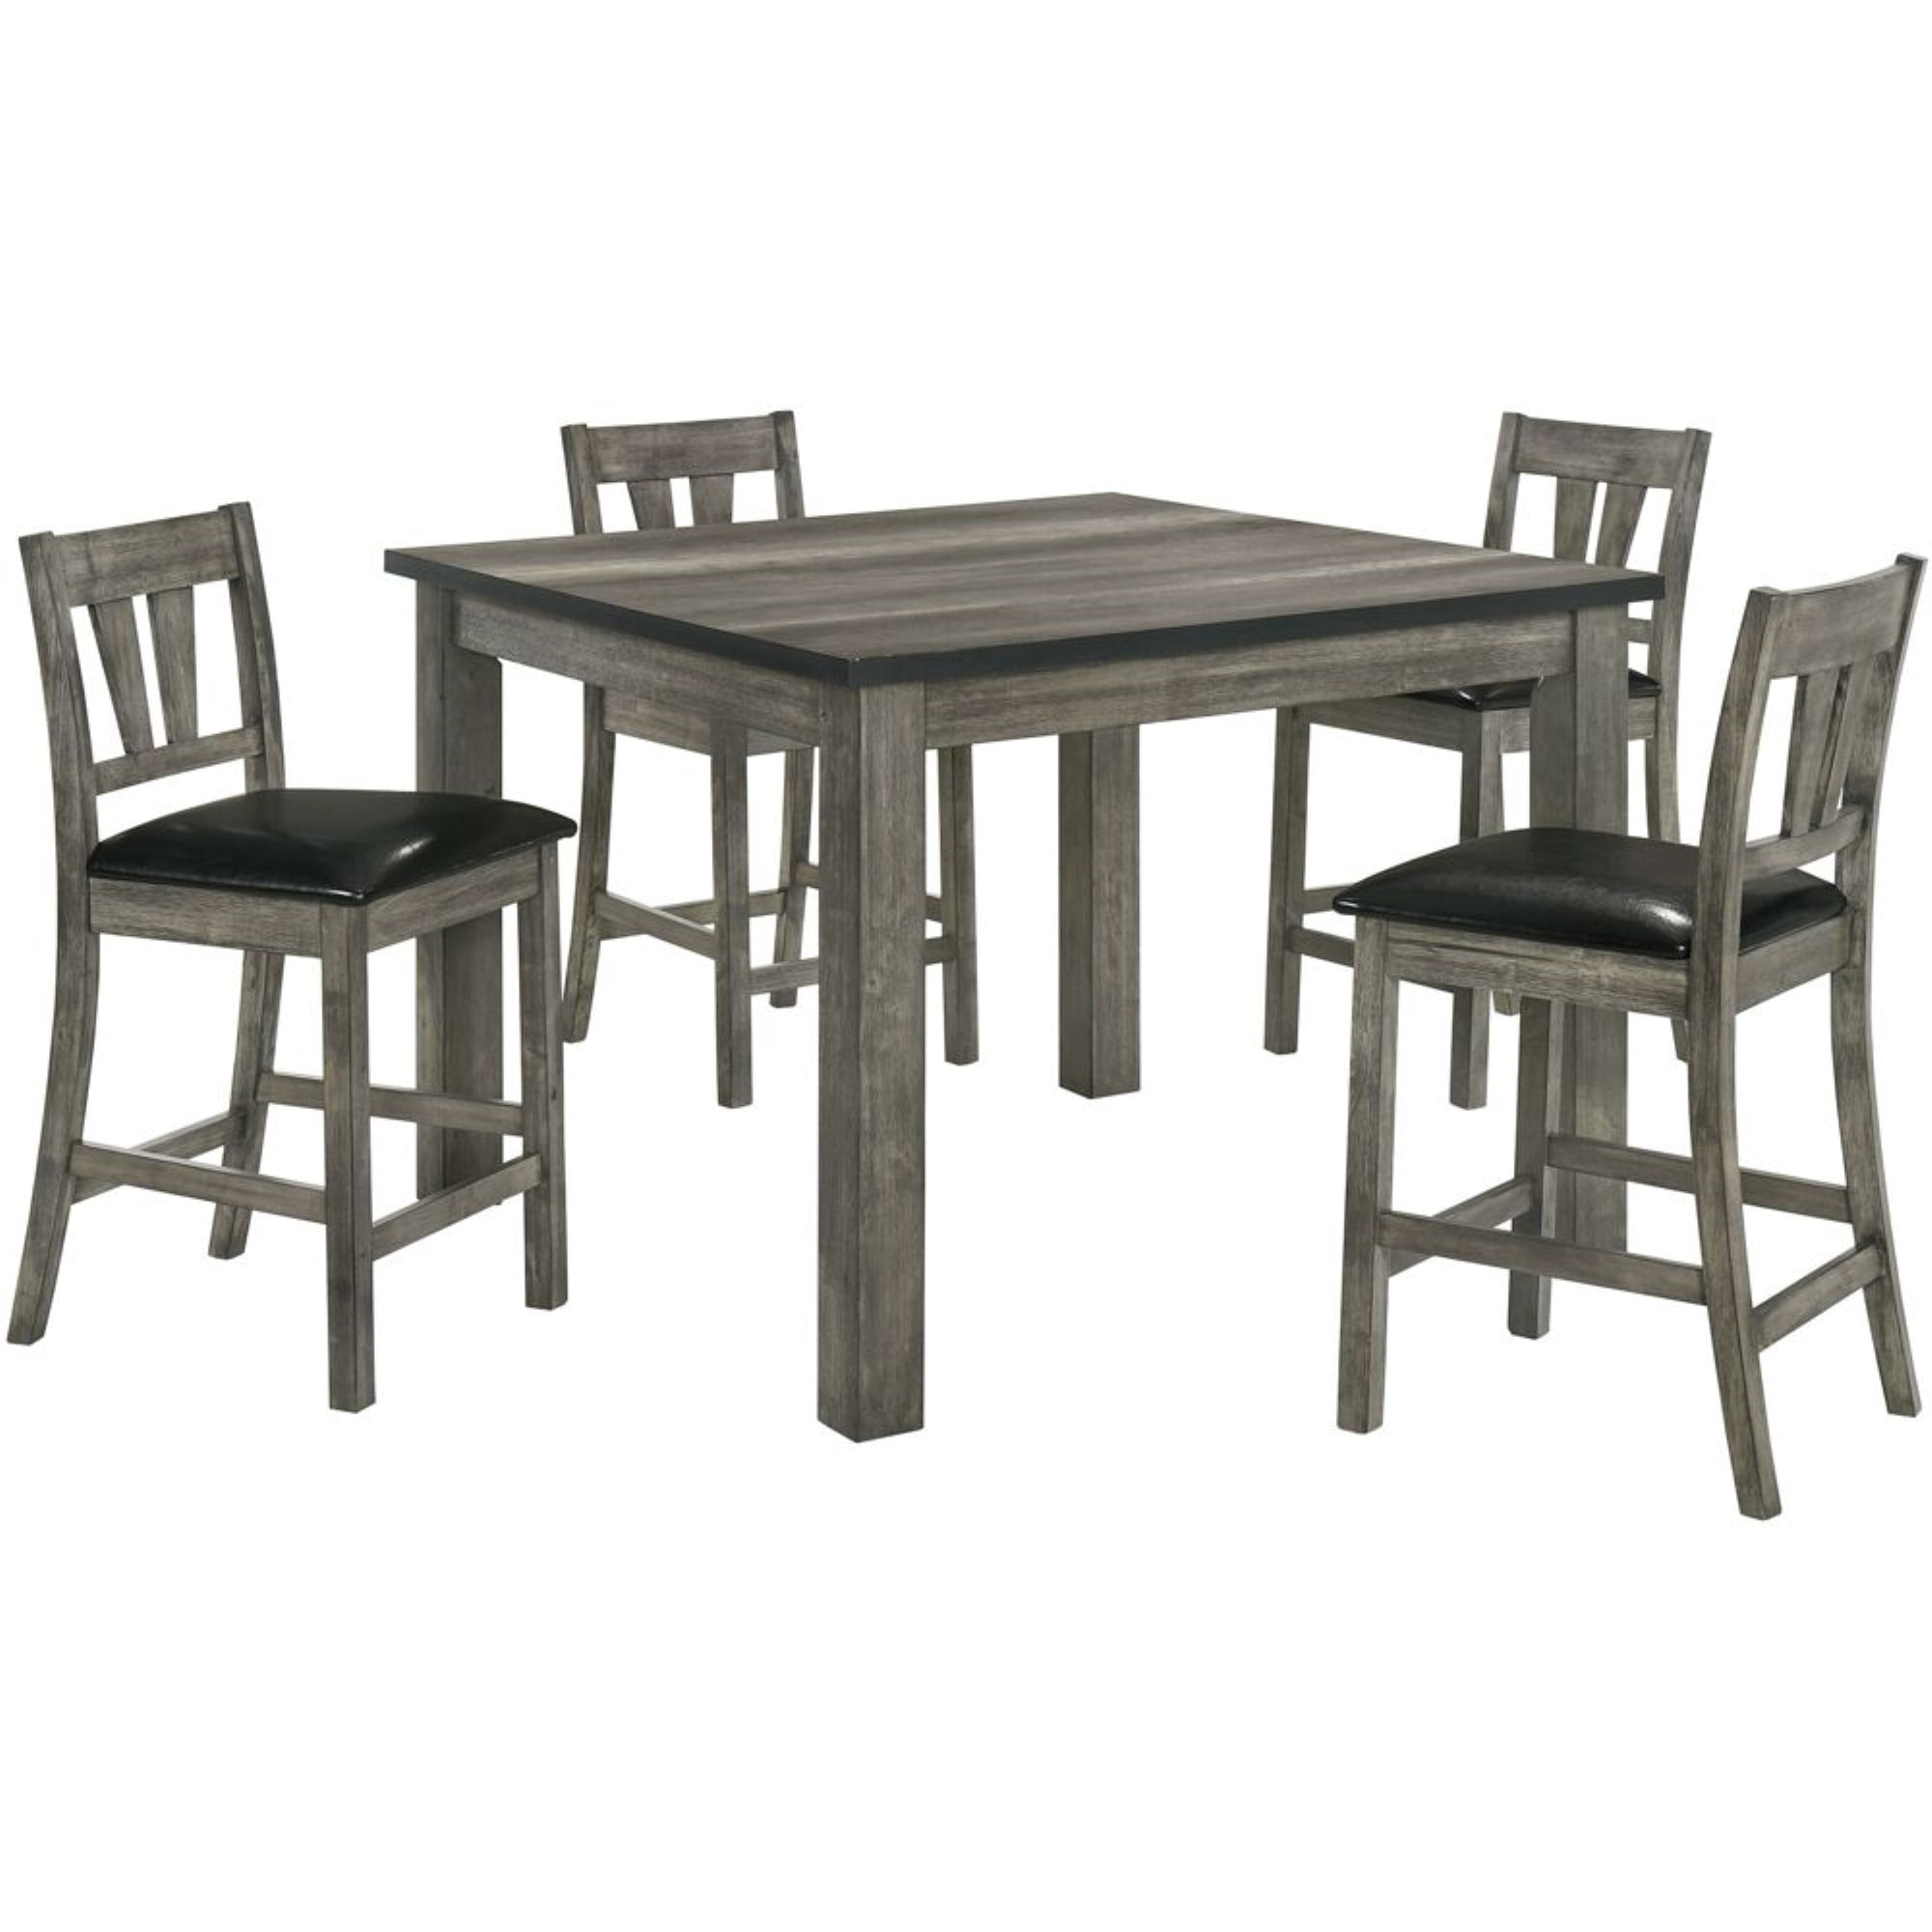 Cmf 982006-pu5pc-wg Counter Height Table - 4 Faux Leather Chairs Dining Set - 5 Piece